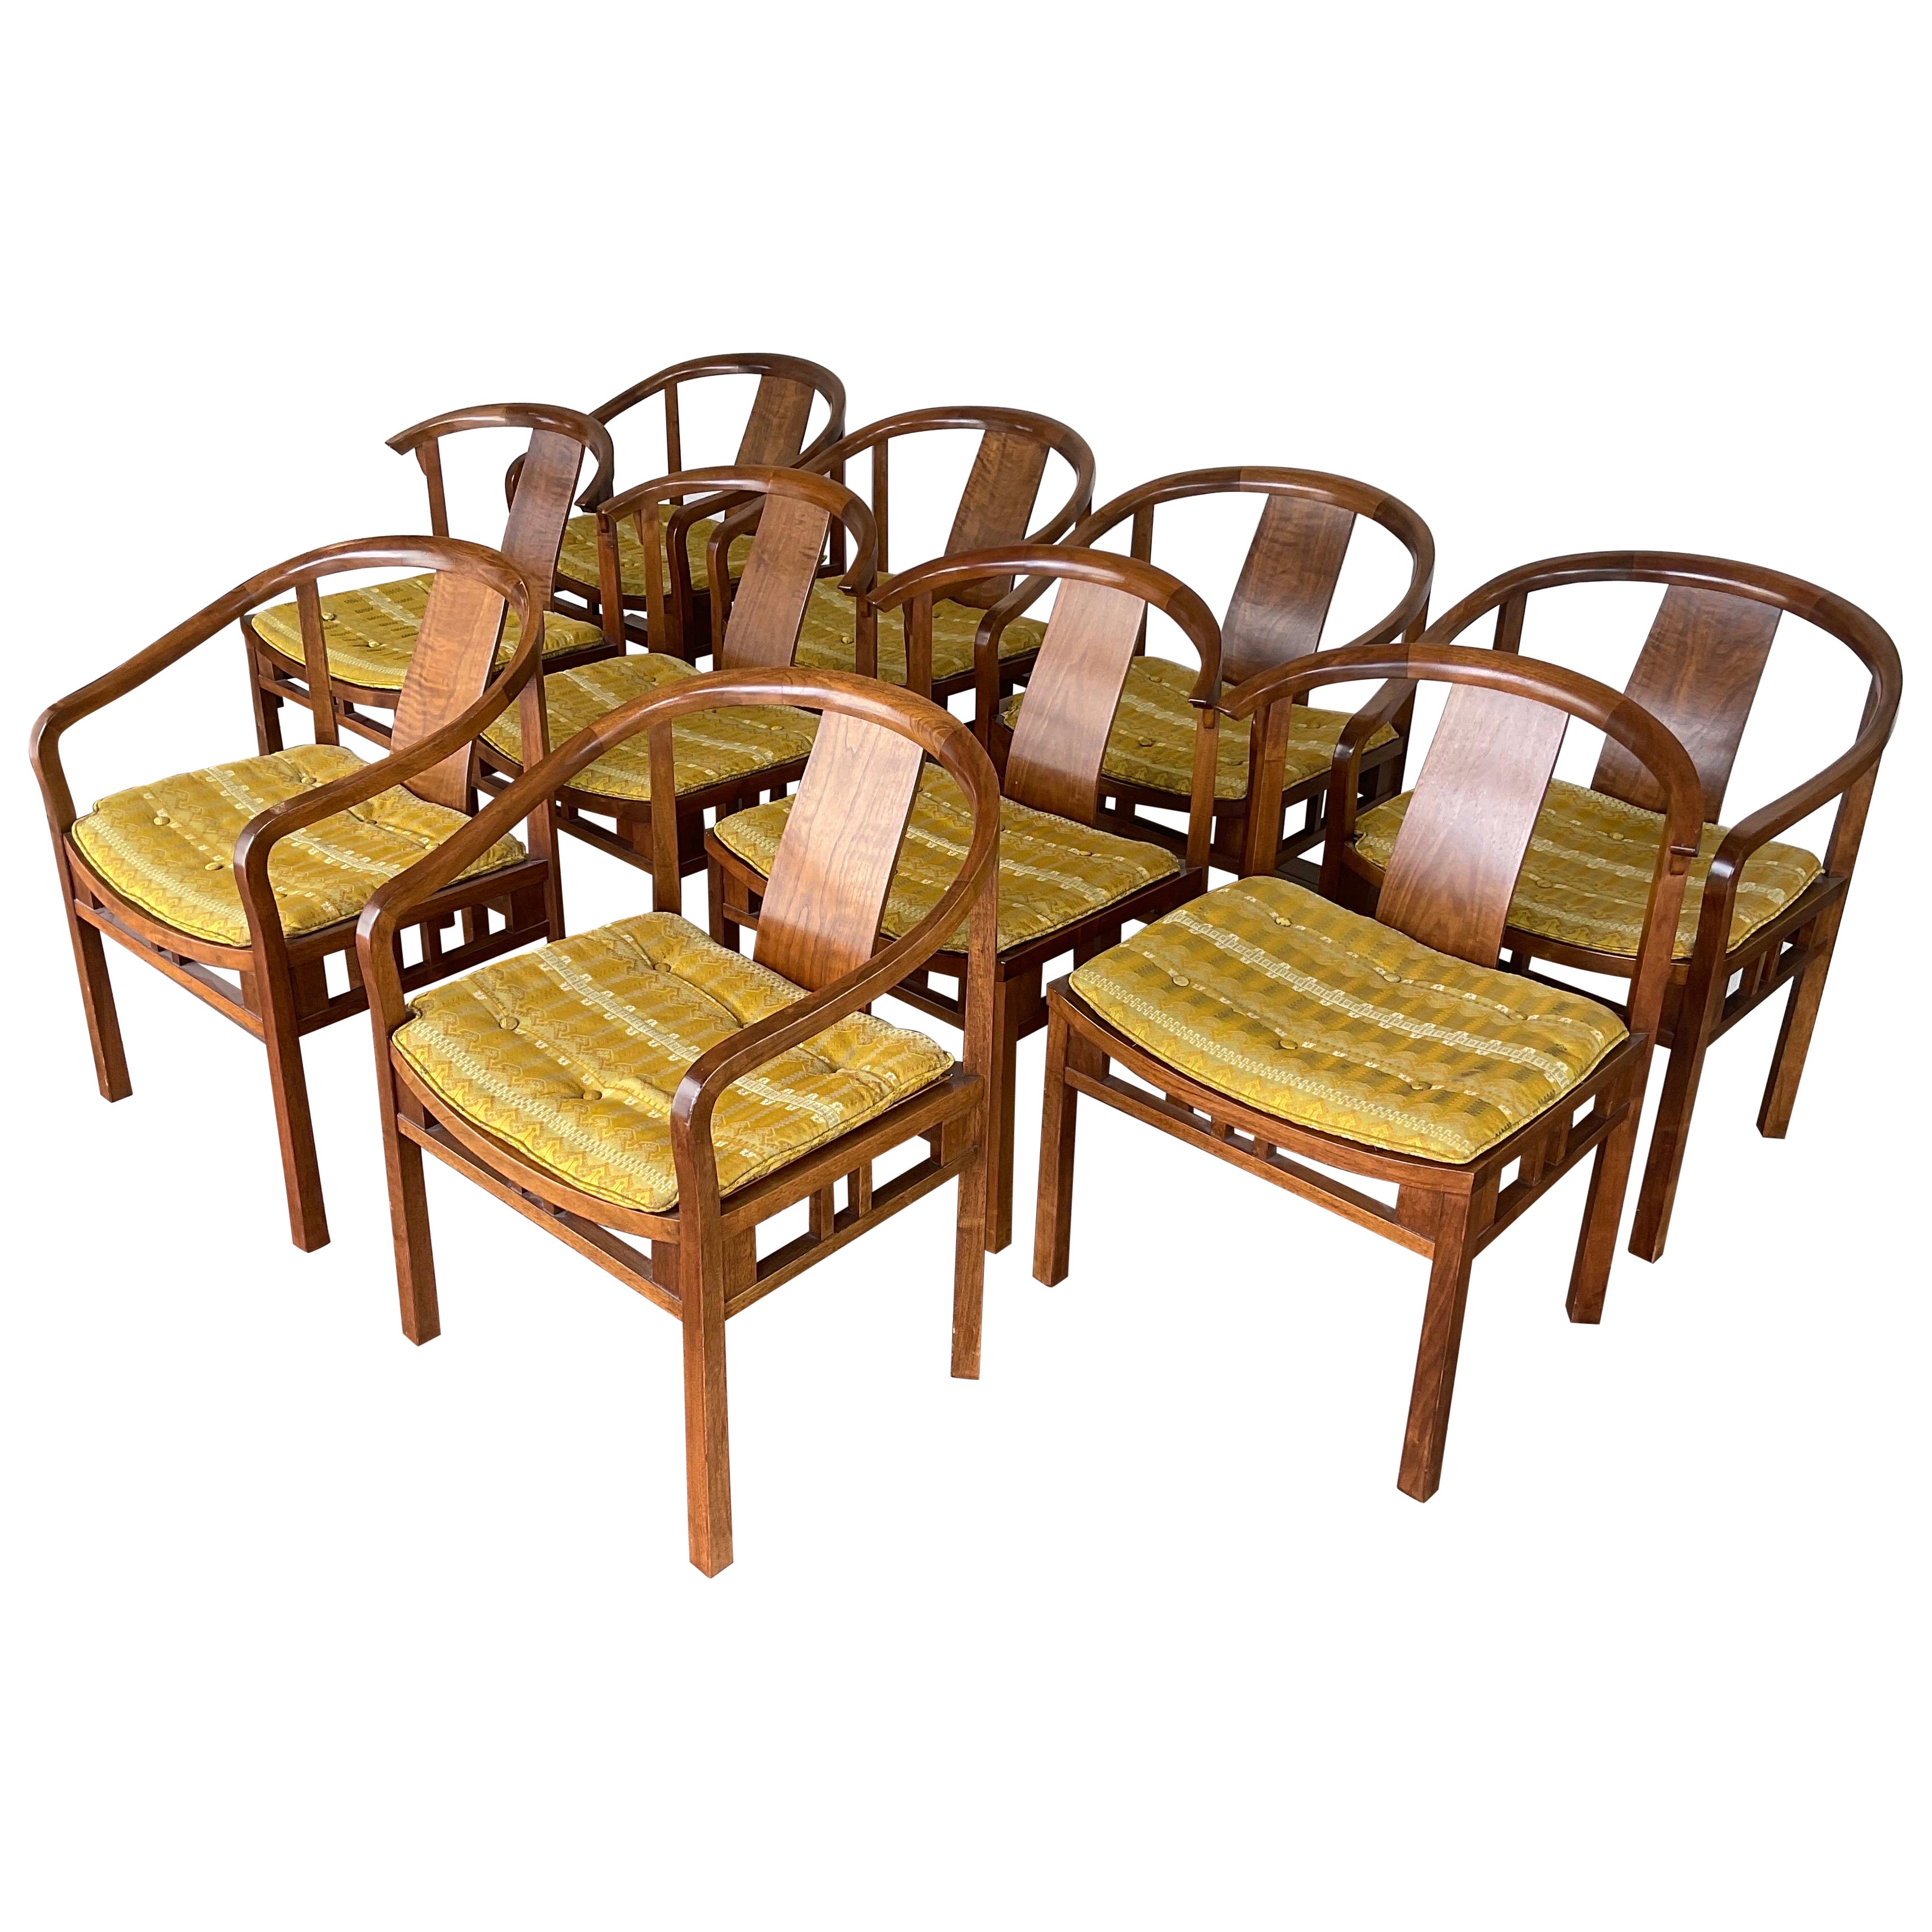 1950s Walnut Dining Chairs by Michael Taylor for Baker Furniture - Set of 10 For Sale